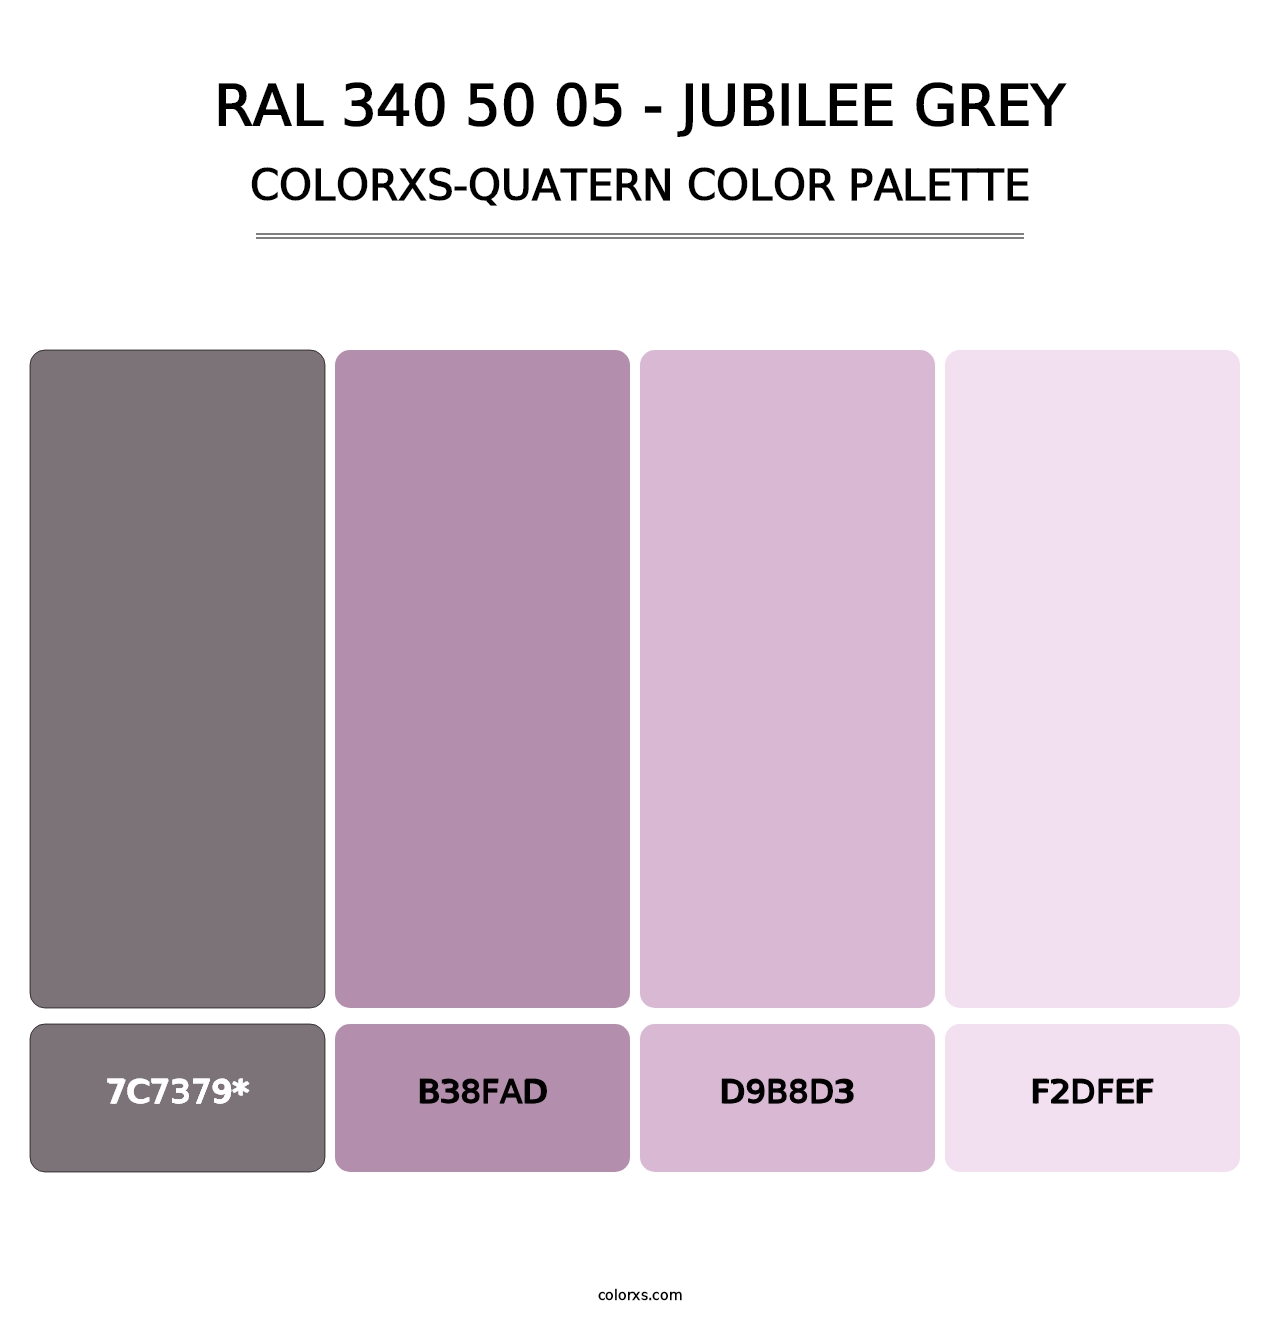 RAL 340 50 05 - Jubilee Grey - Colorxs Quatern Palette